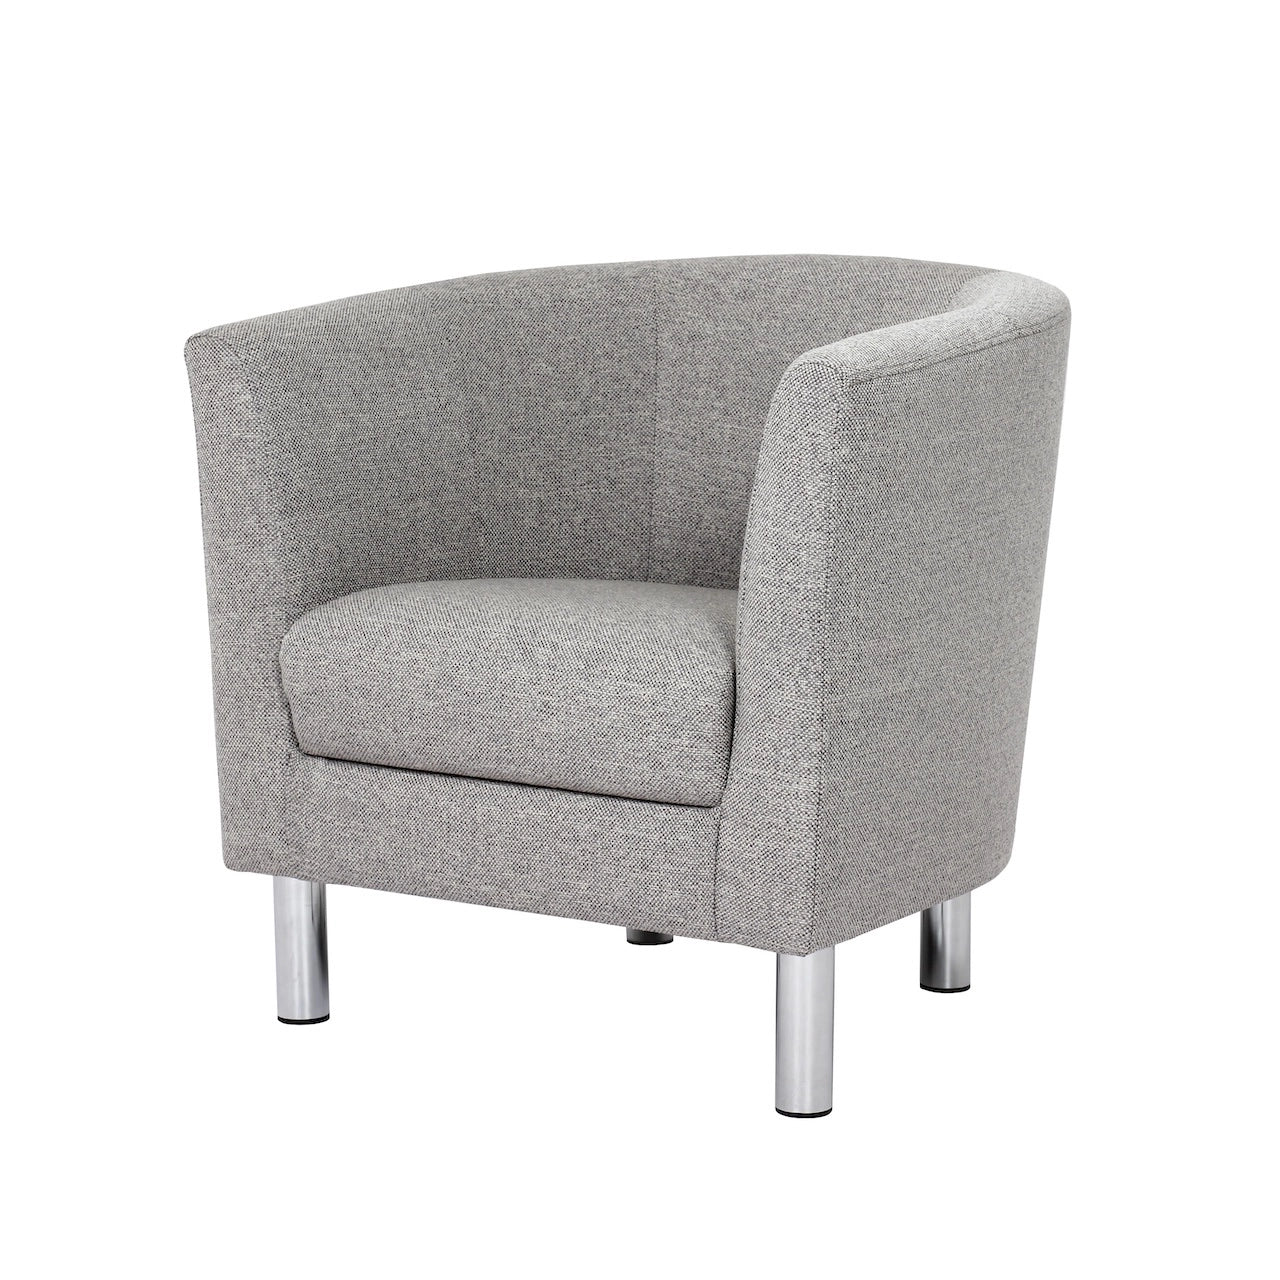 Furniture To Go Cleveland Armchair in Nova Light Grey